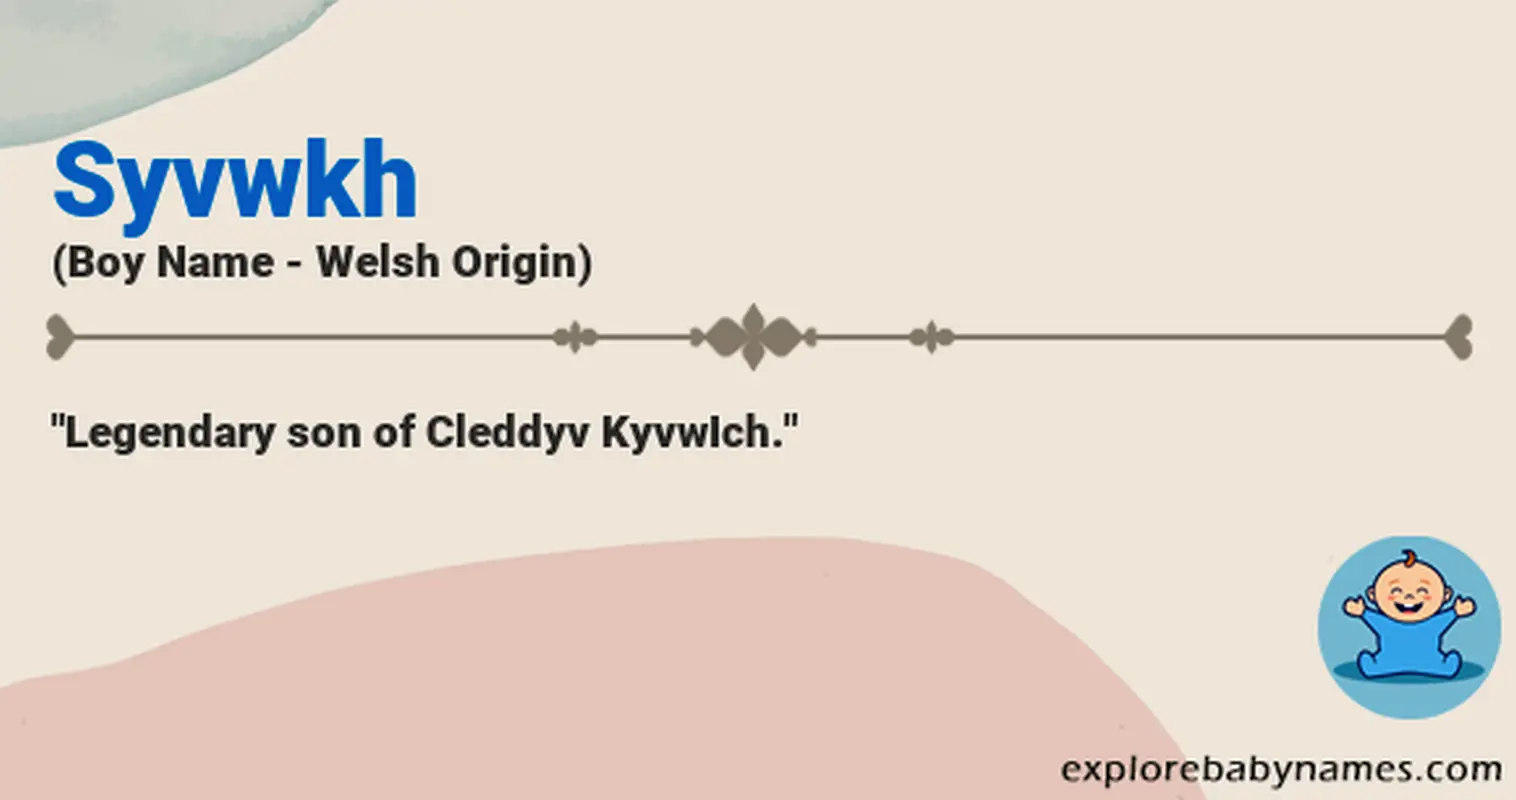 Meaning of Syvwkh